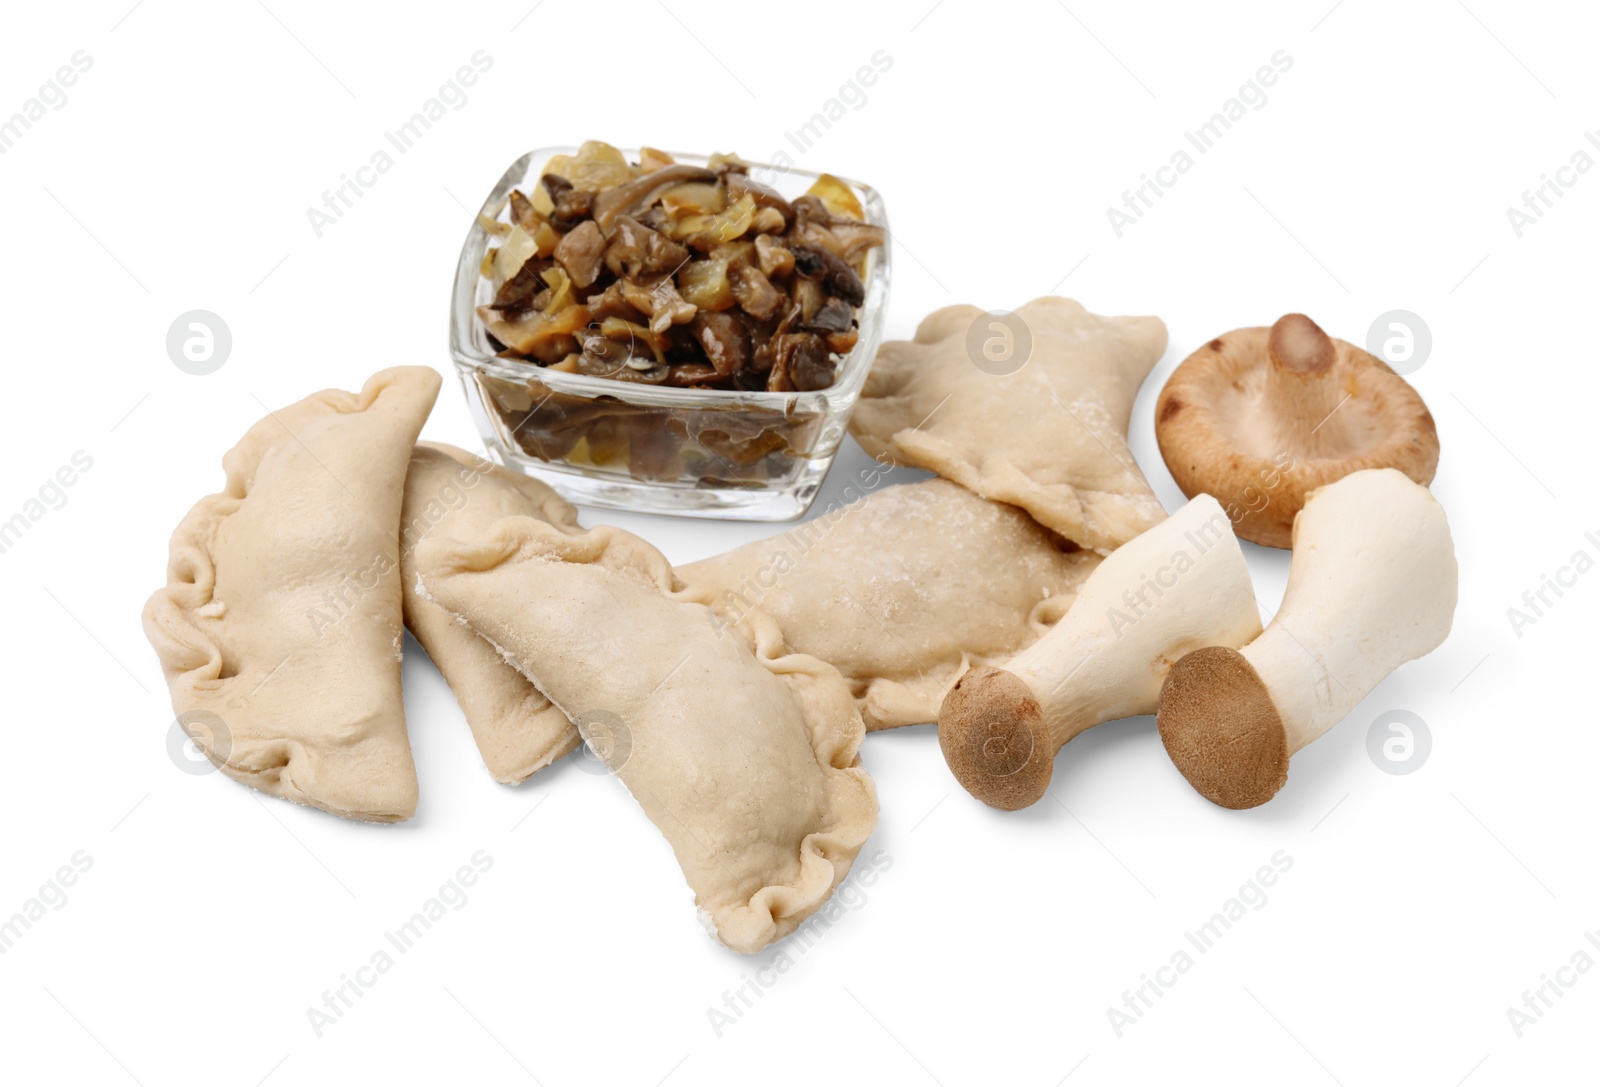 Photo of Raw dumplings (varenyky) and mushrooms isolated on white